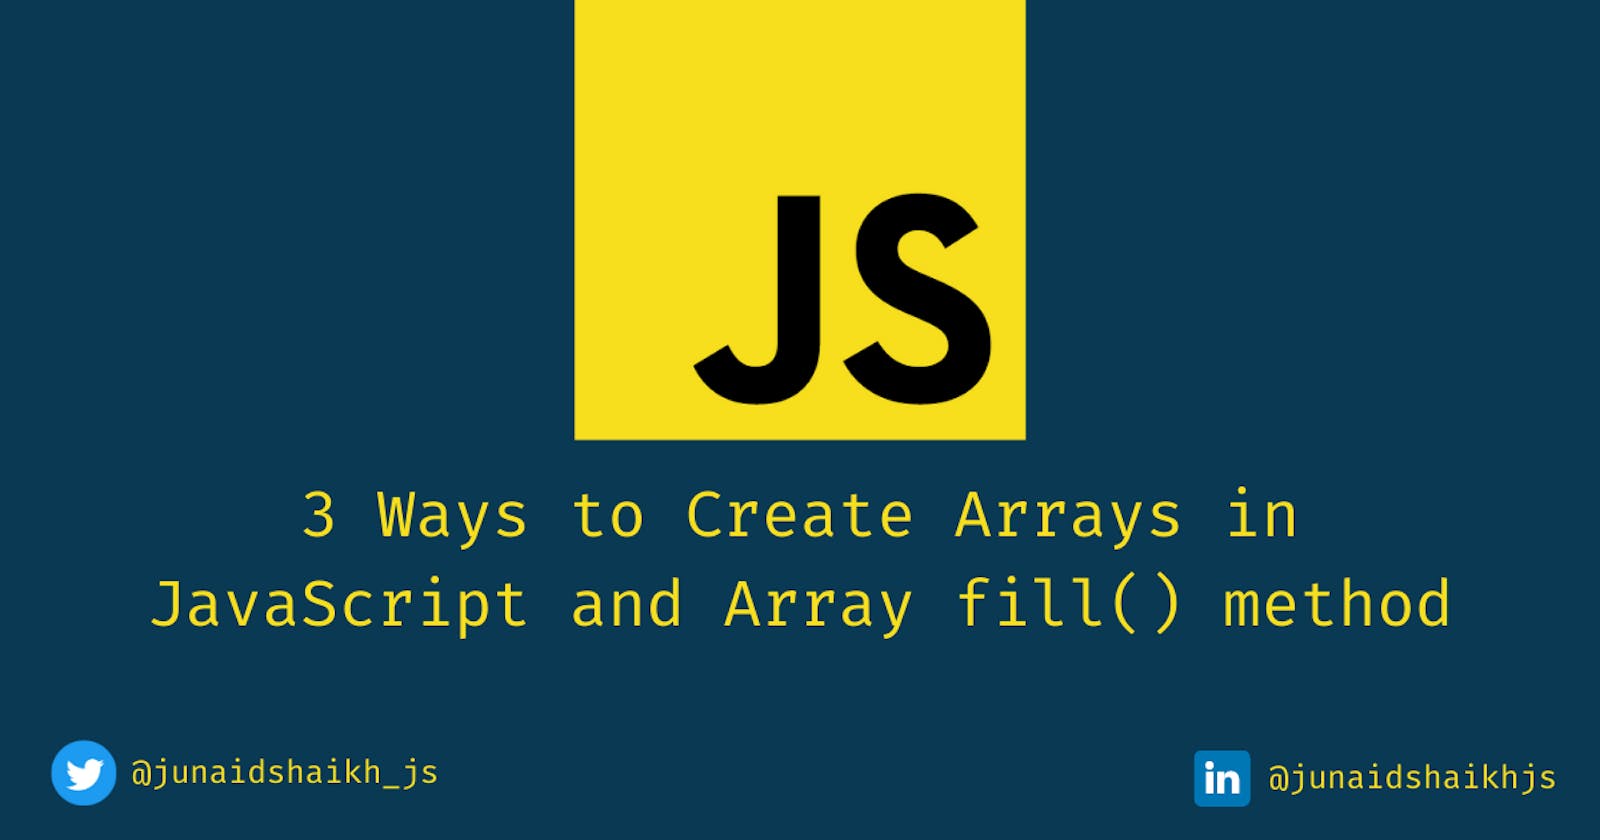 3 Ways to Create Arrays in JavaScript and Array fill() method